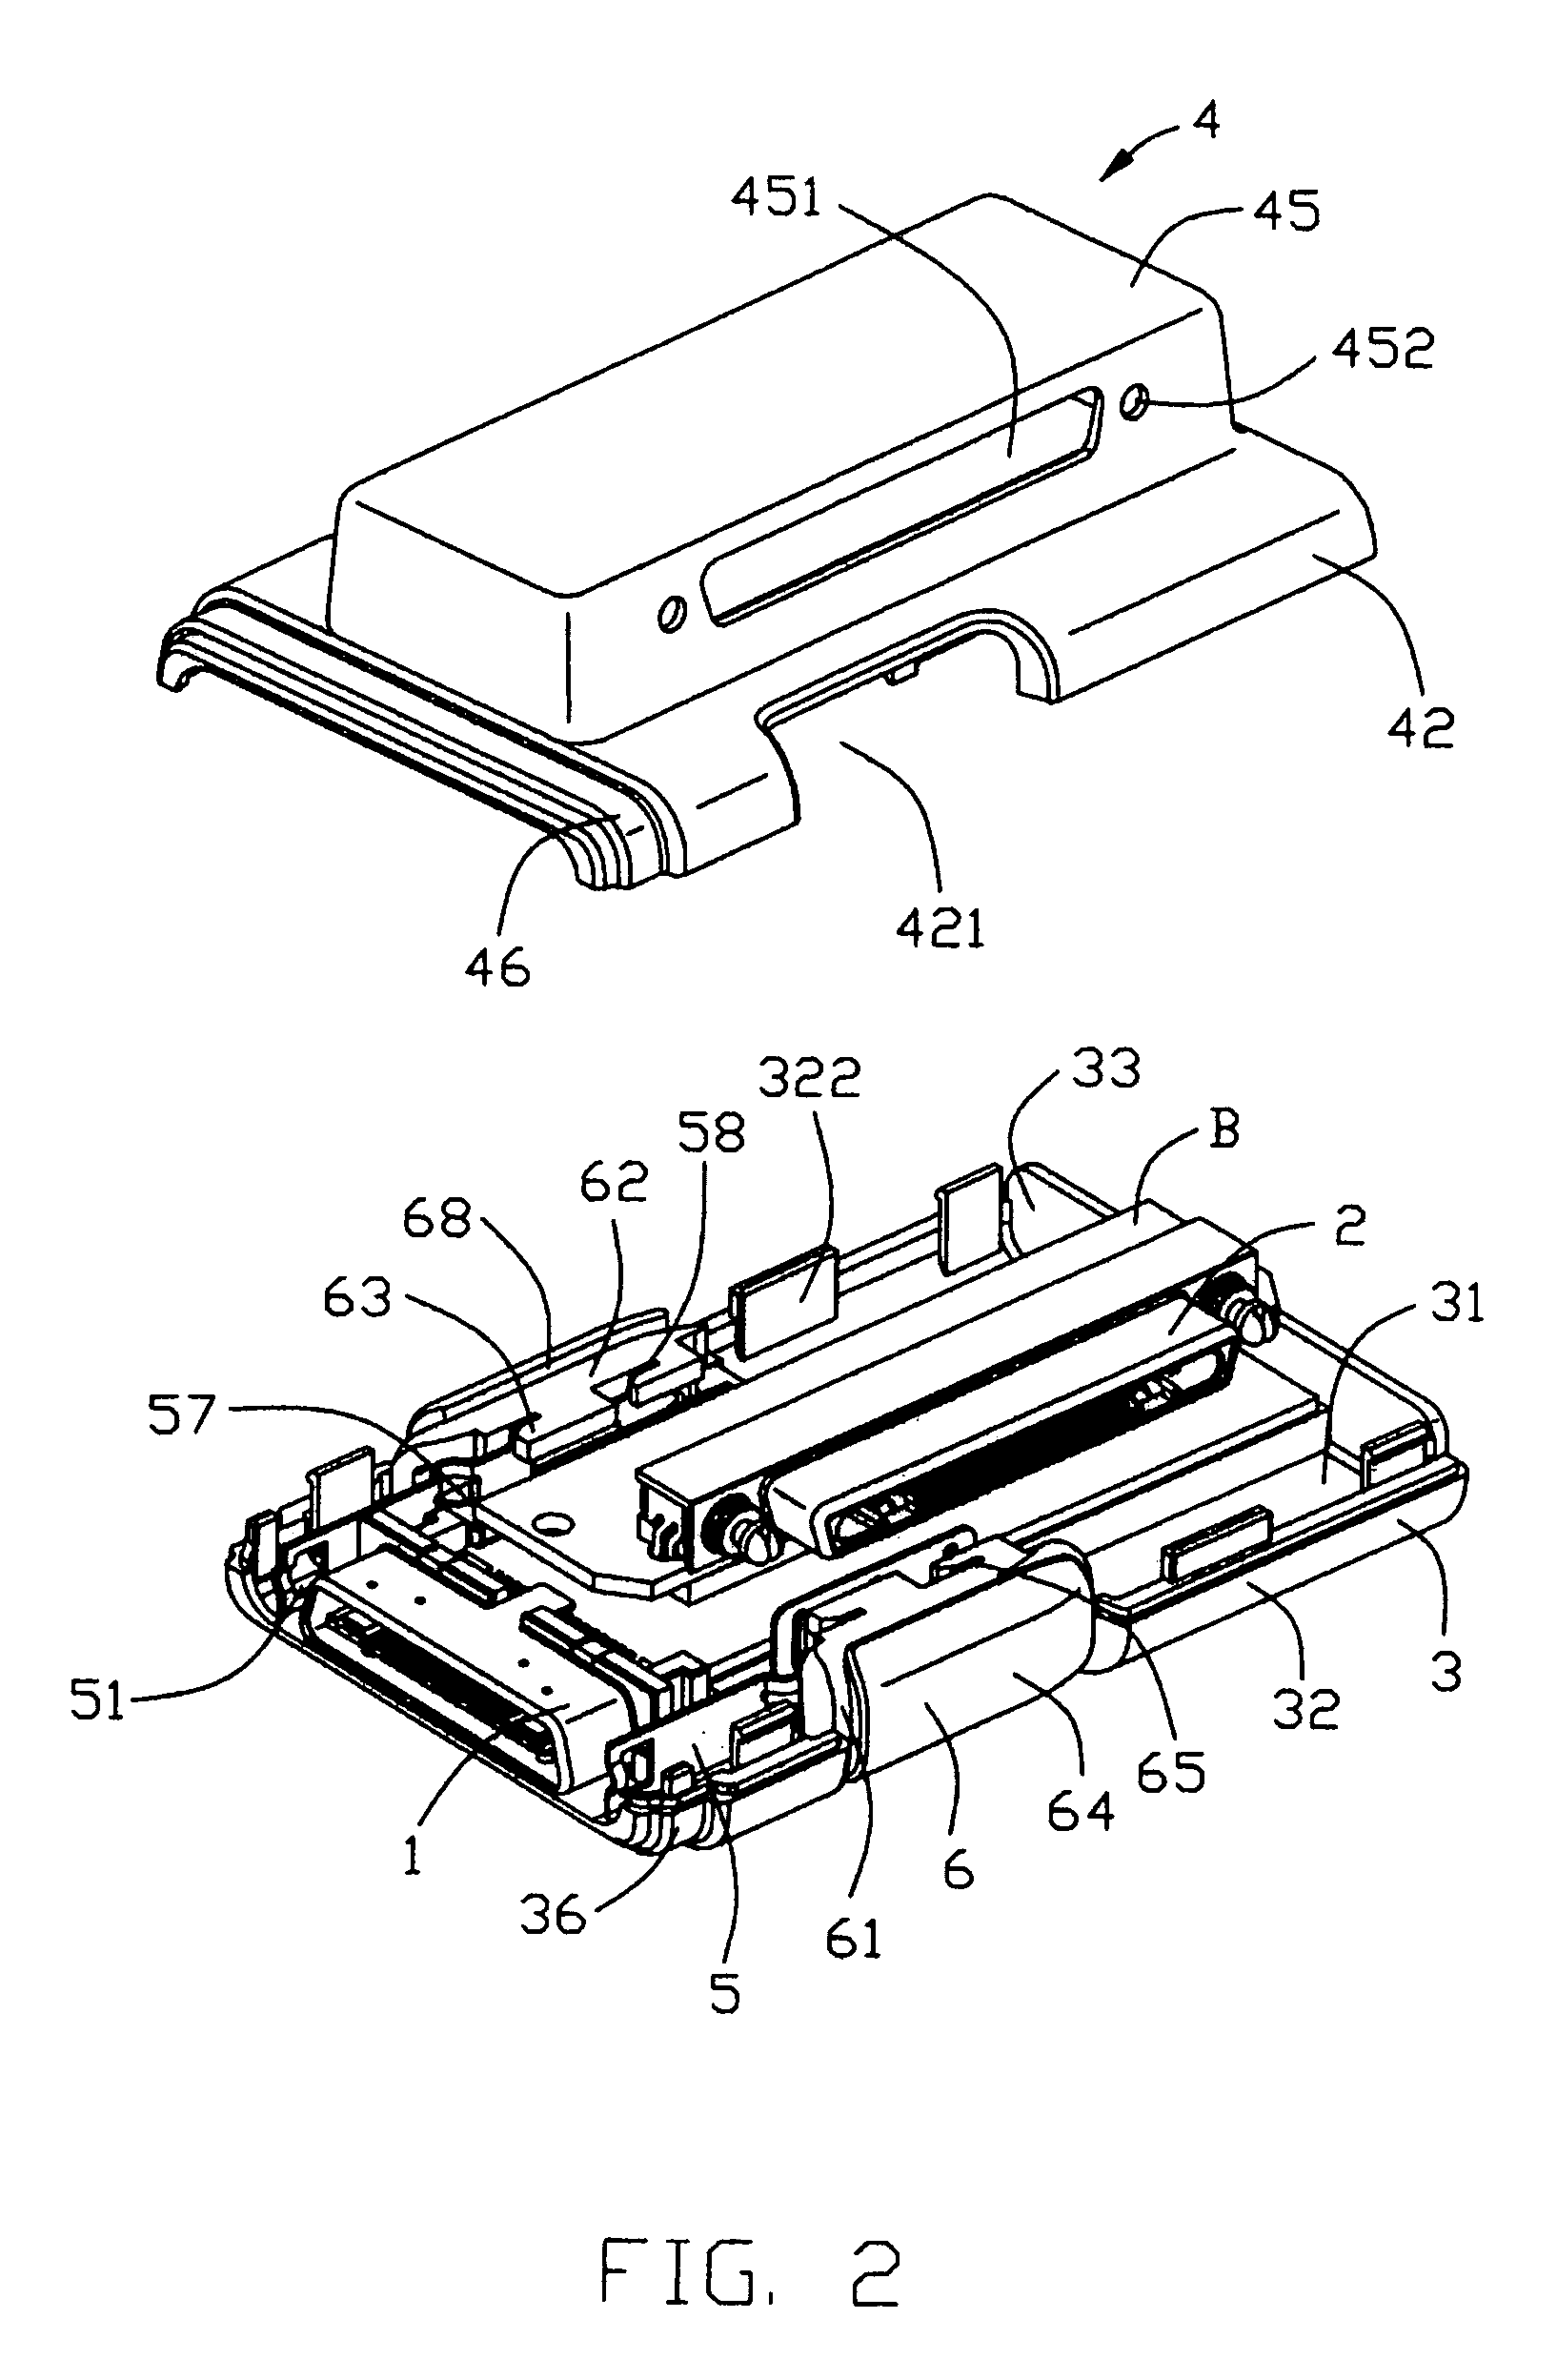 Interlocking member for an electrical connector